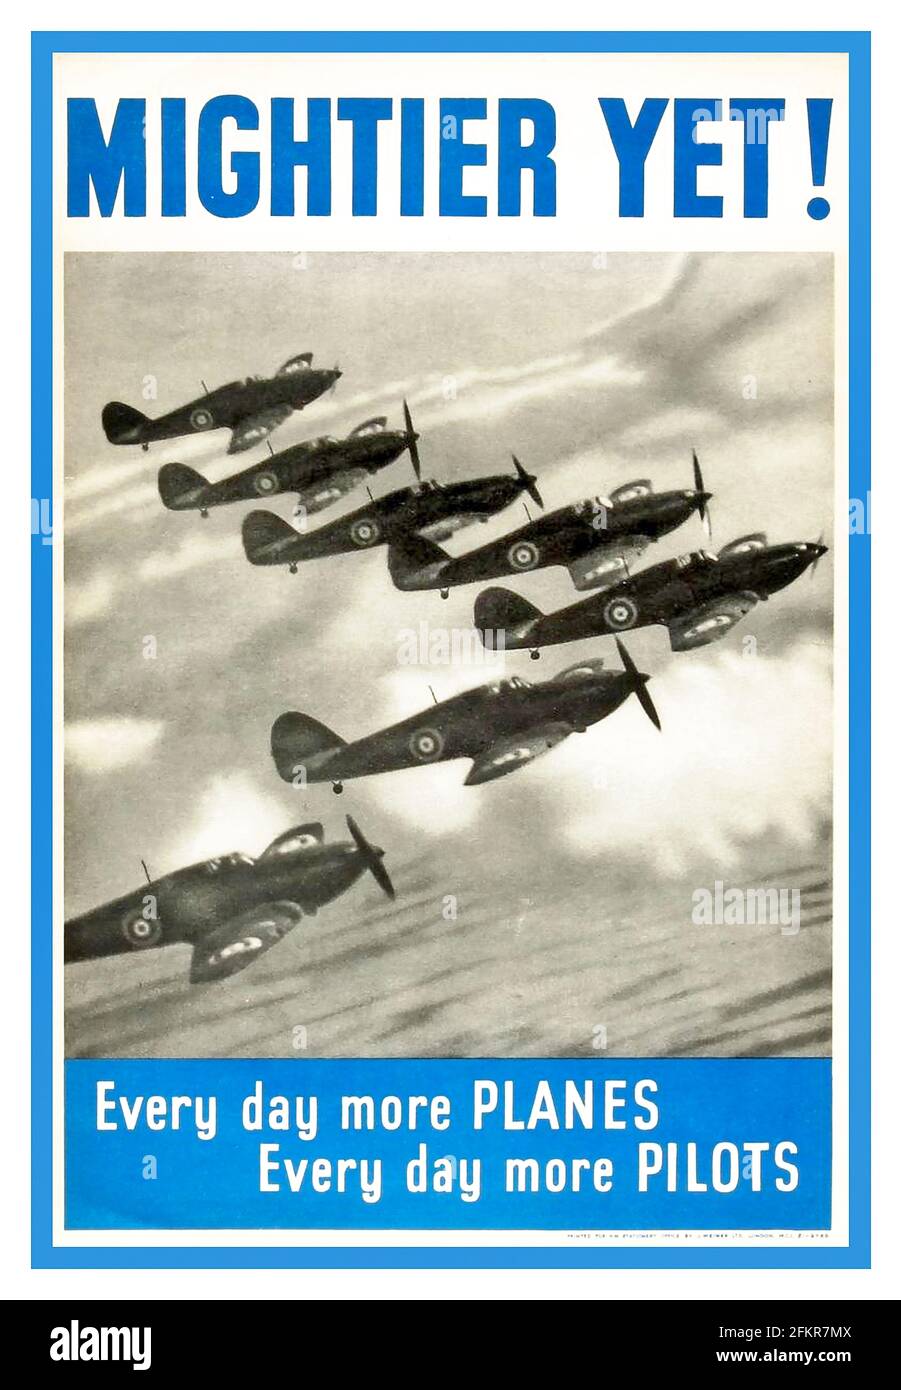 Vintage “MIGHTIER YET” UK SPITFIRE FORMATION RAF POSTER 1940's WW2 RAF British RAF Propaganda Recruitment Poster  'Mightier Yet !' (Title from 'Elgar's LAND OF HOPE AND GLORY)  'Every day more PLANES'  'Every day more PILOTS'  Squadron of Spitfire Aircraft featured flying in formation..The Battle of Britain World War II Second World War 1940 Mightier Yet! Every day more Planes. Every day more Pilots. Stock Photo